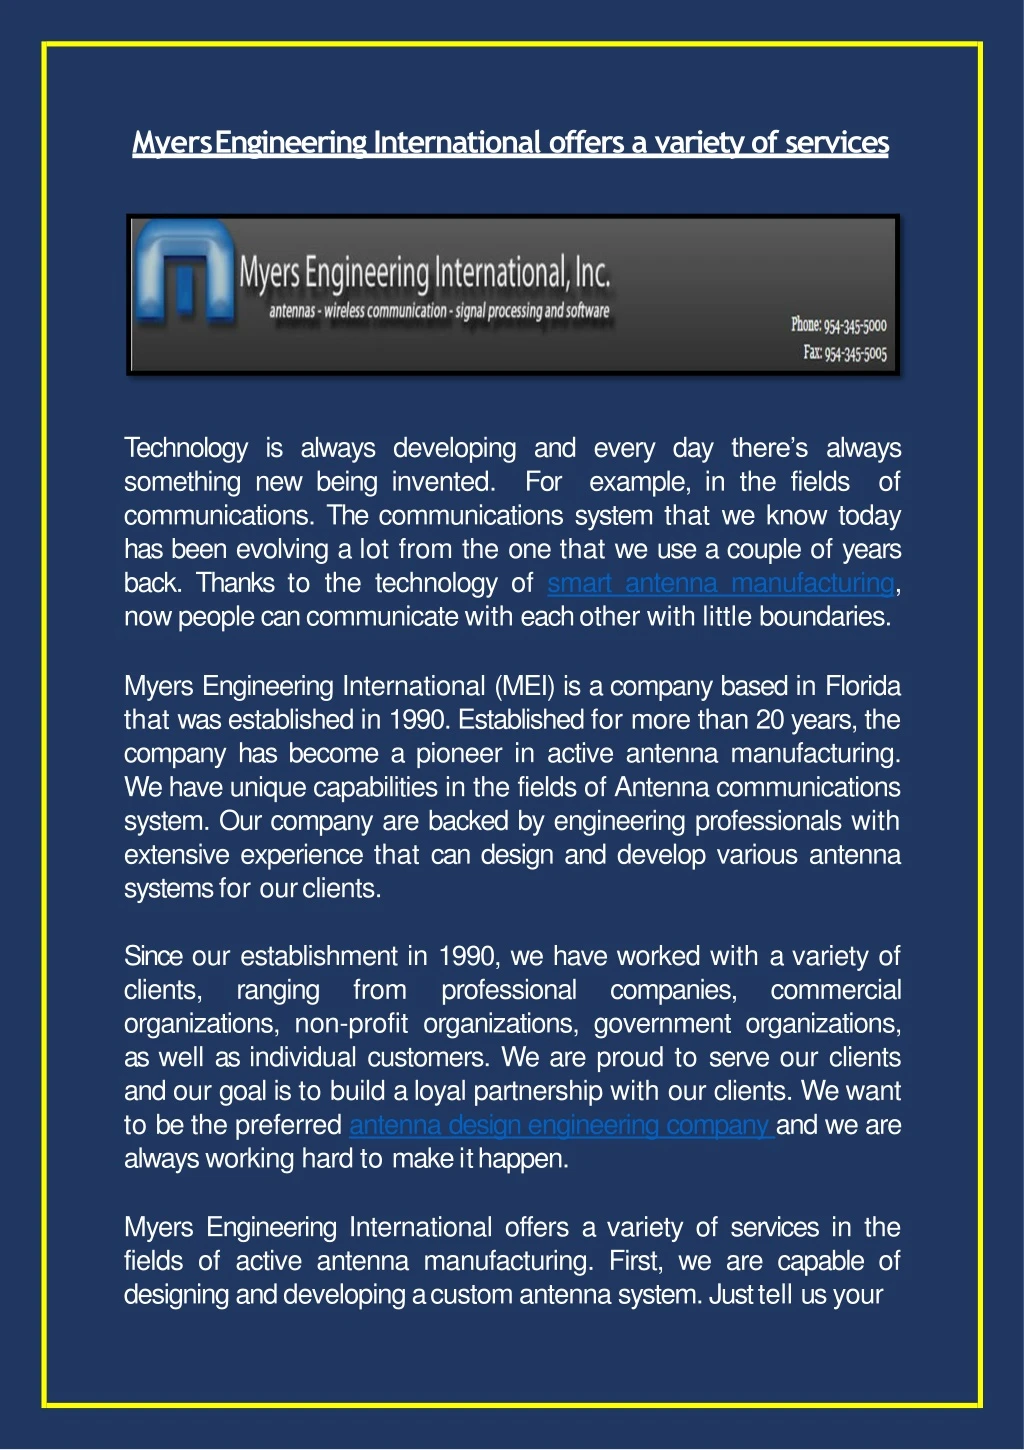 myers engineering international offers a variety